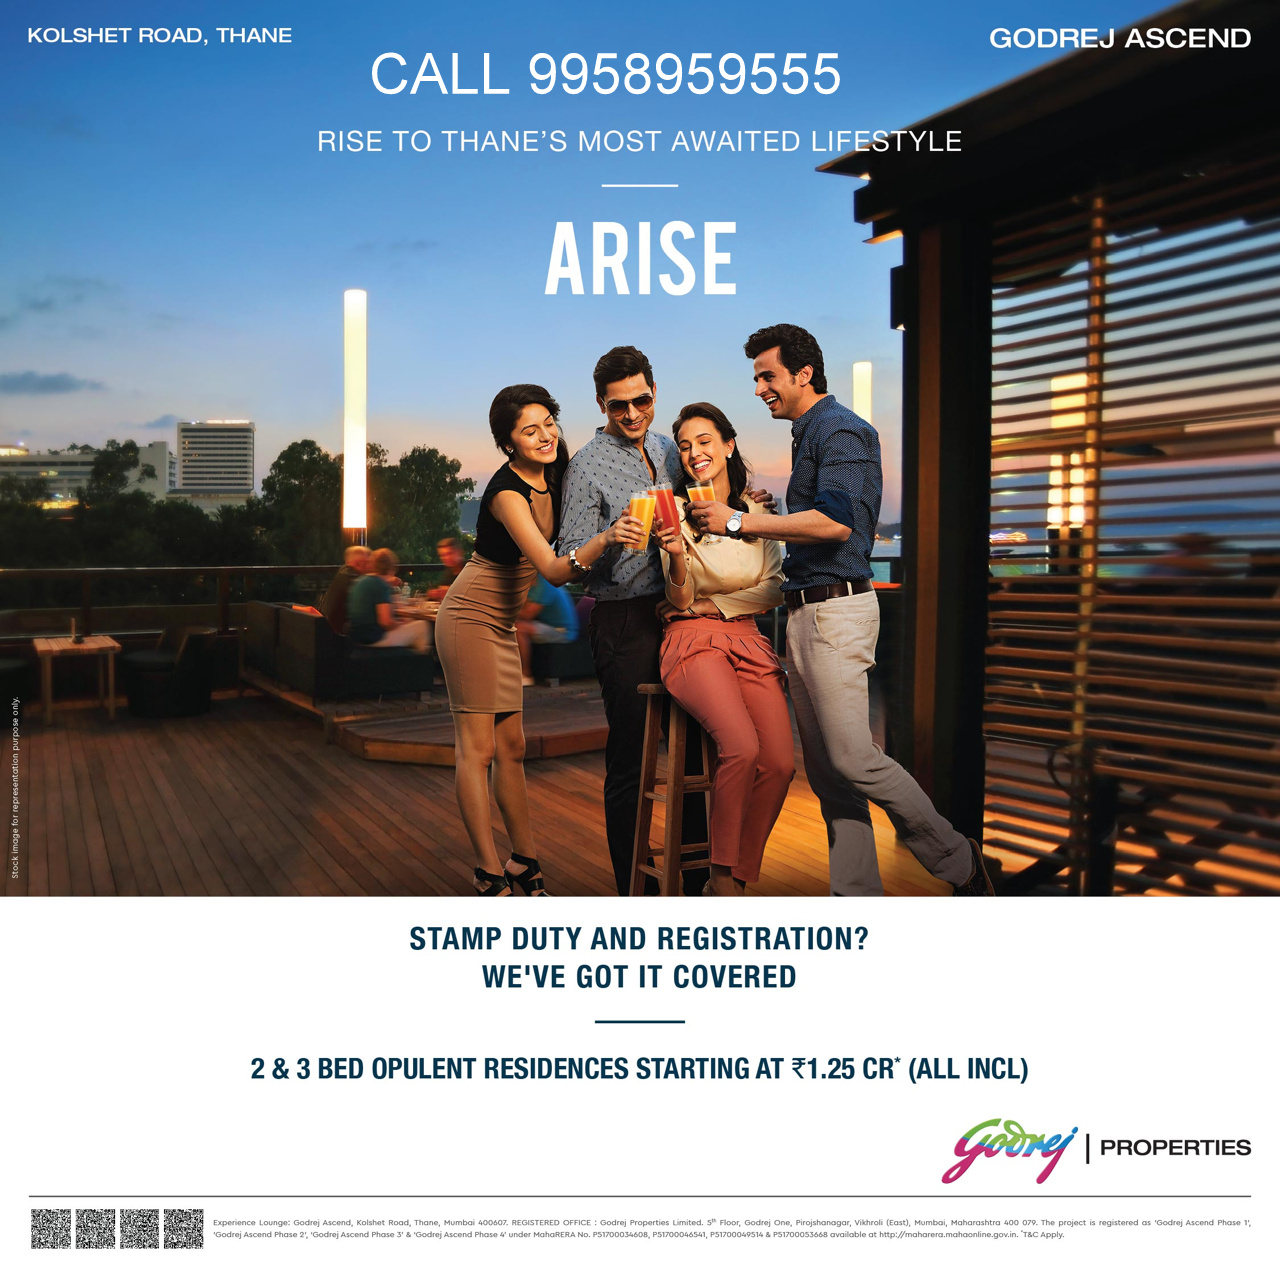 2 & 3 bed opulent residences starting at 1.25cr all inc.